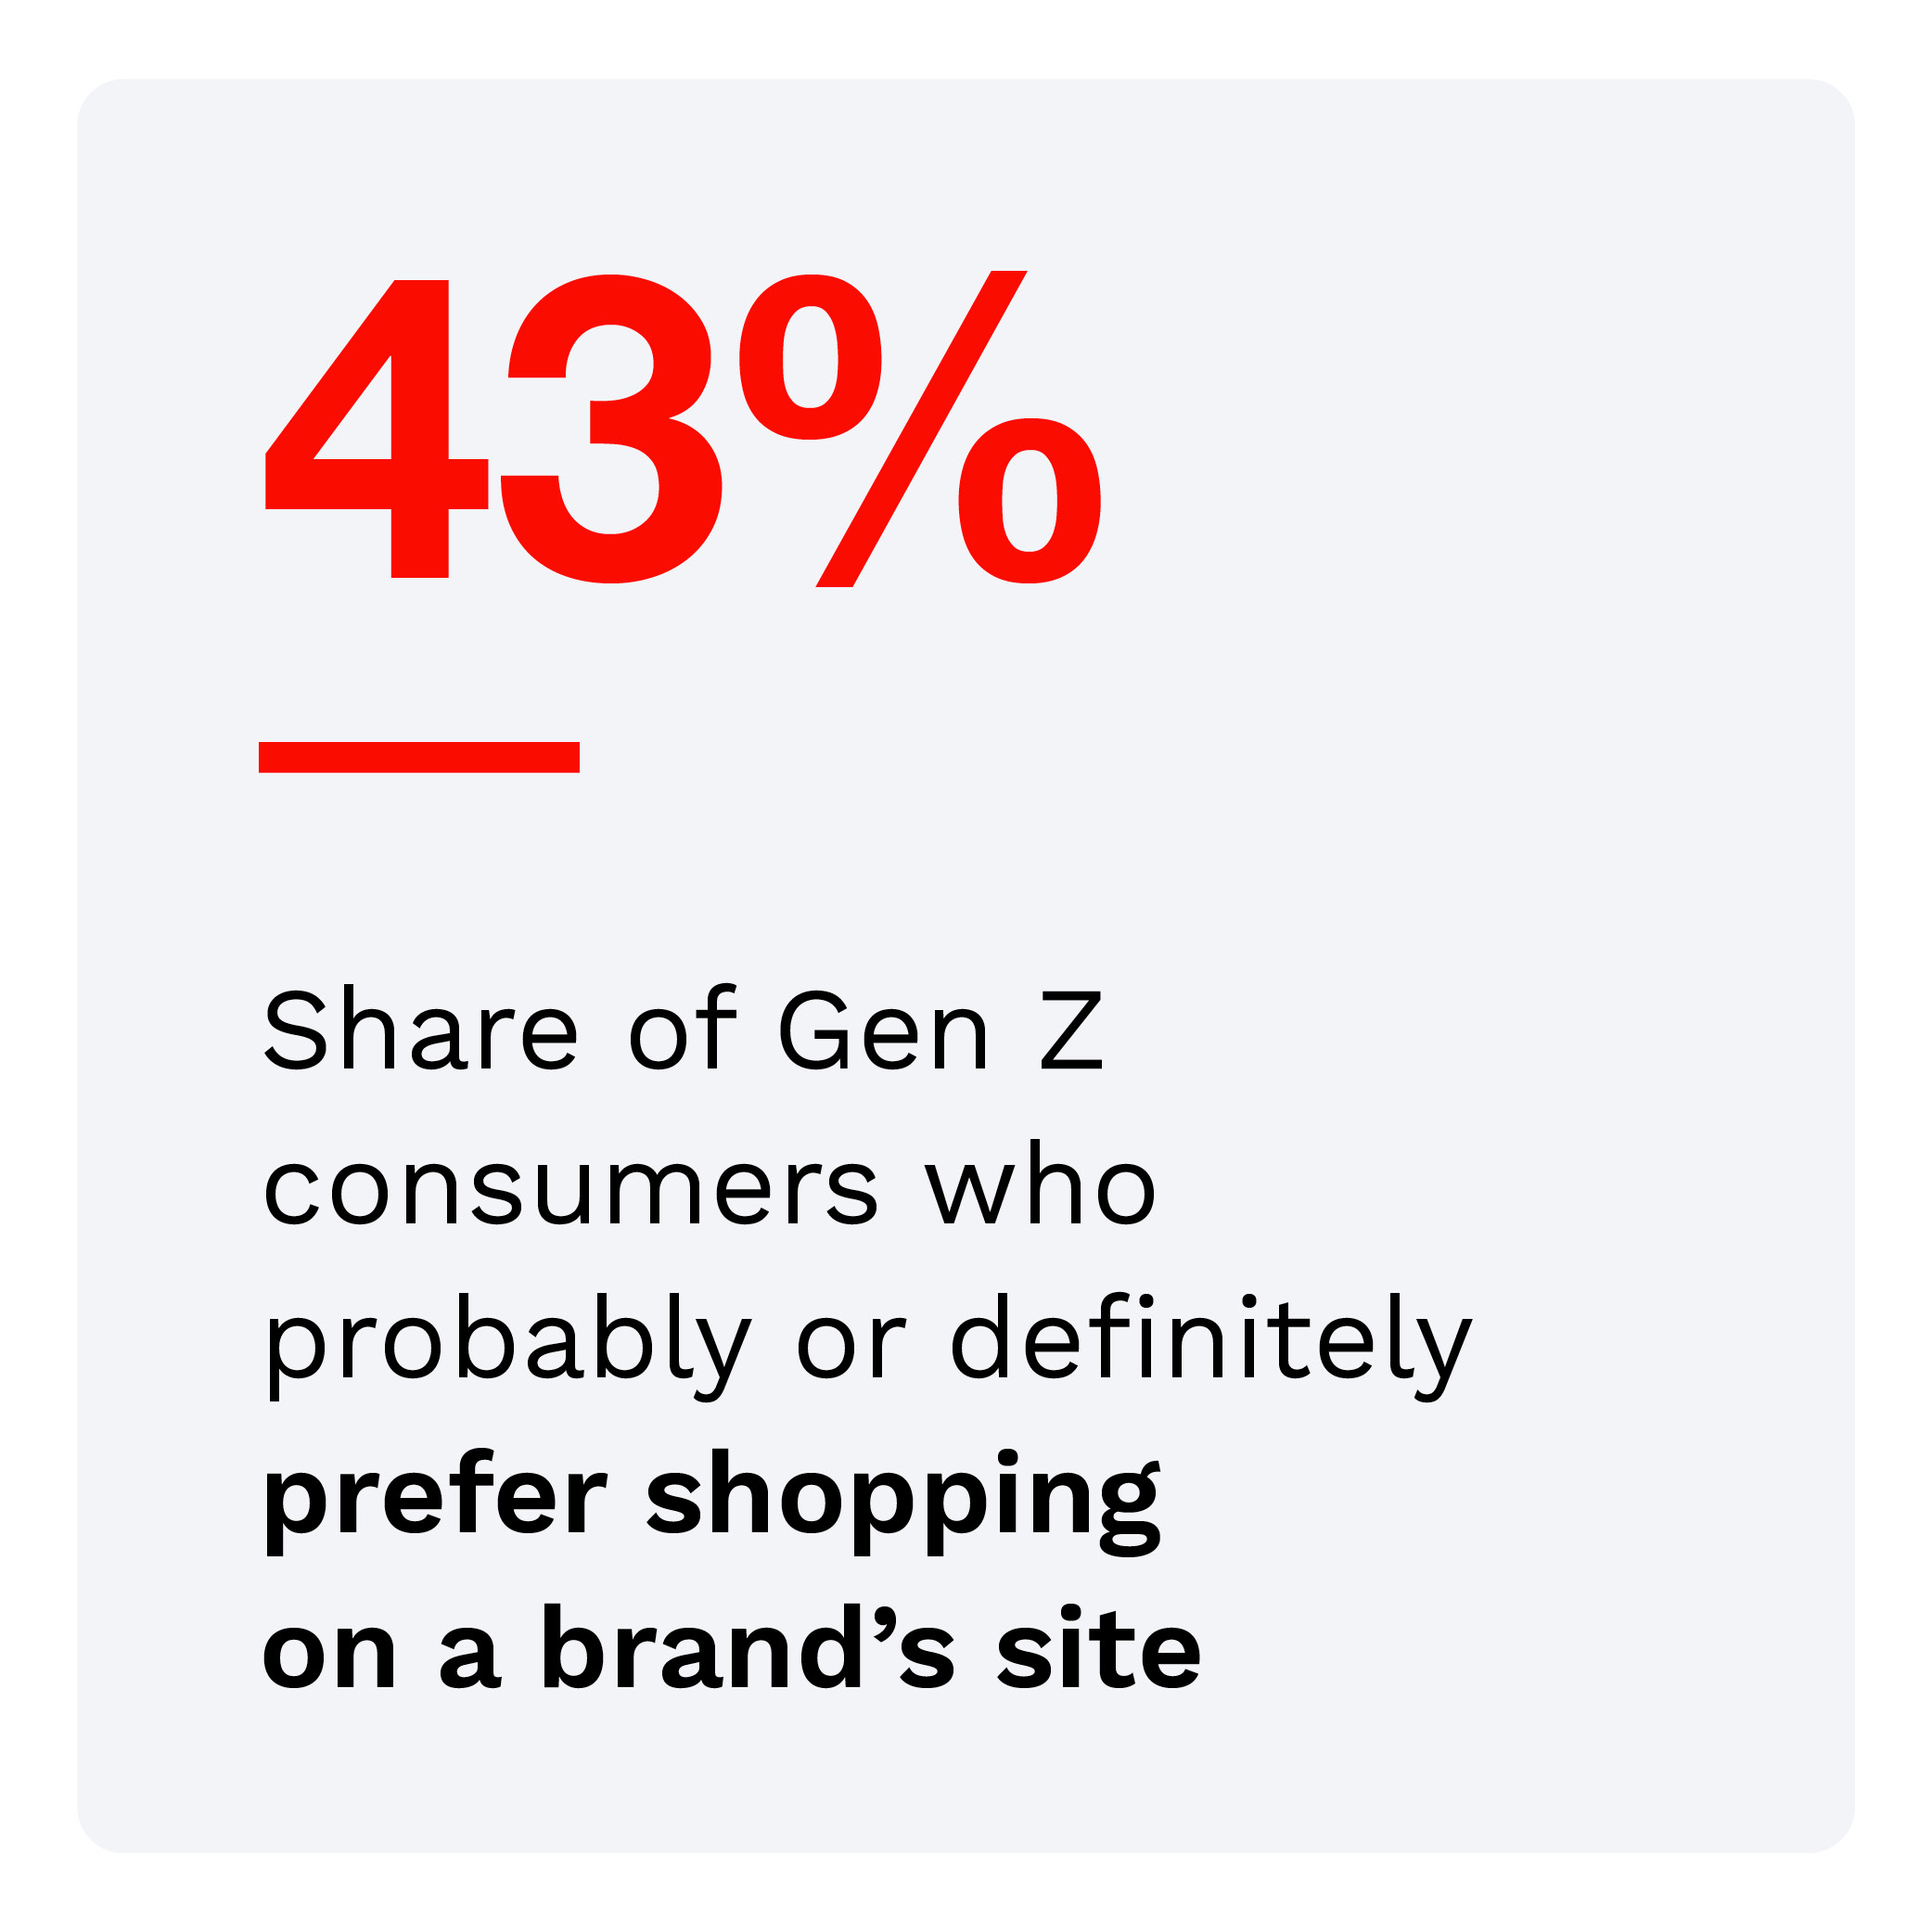 43%: Share of Gen Z consumers who probably or definitely prefer shopping on a brand’s site